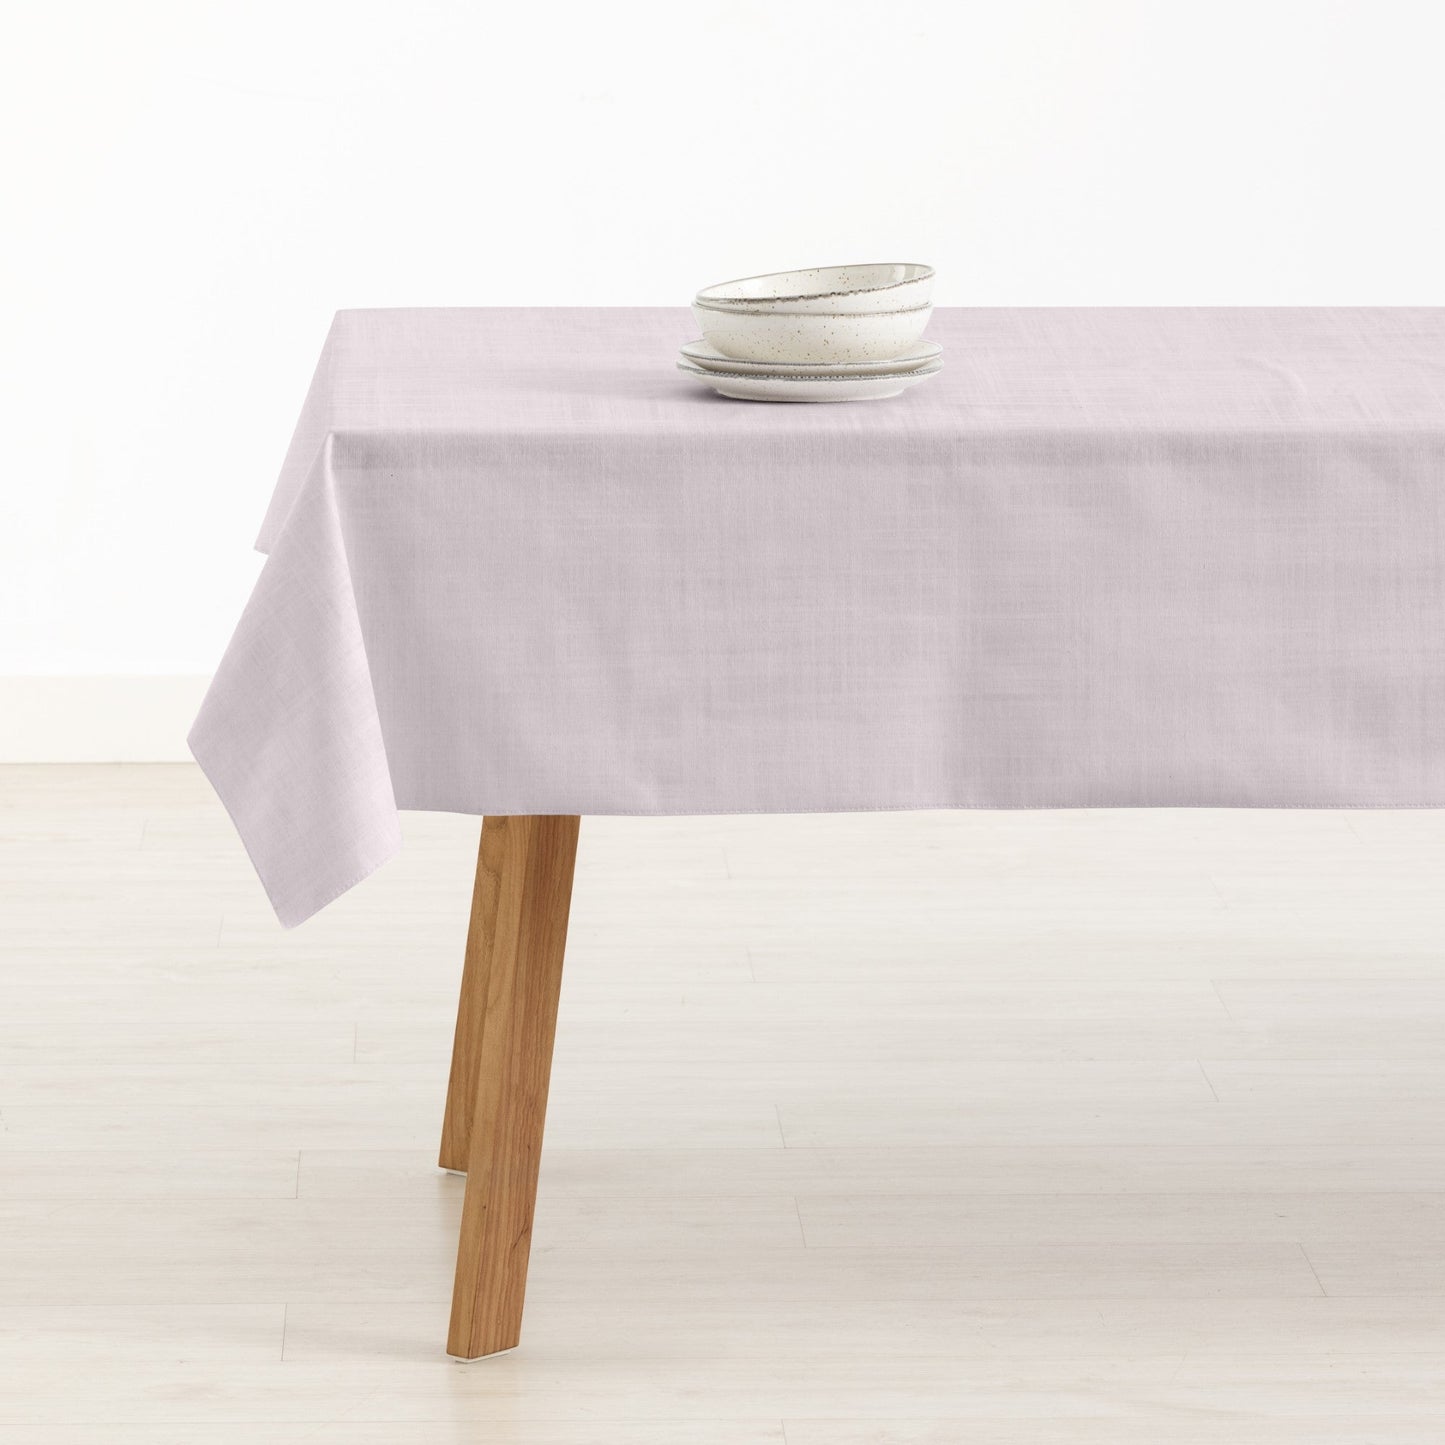 Stain-resistant tablecloth 0120-312